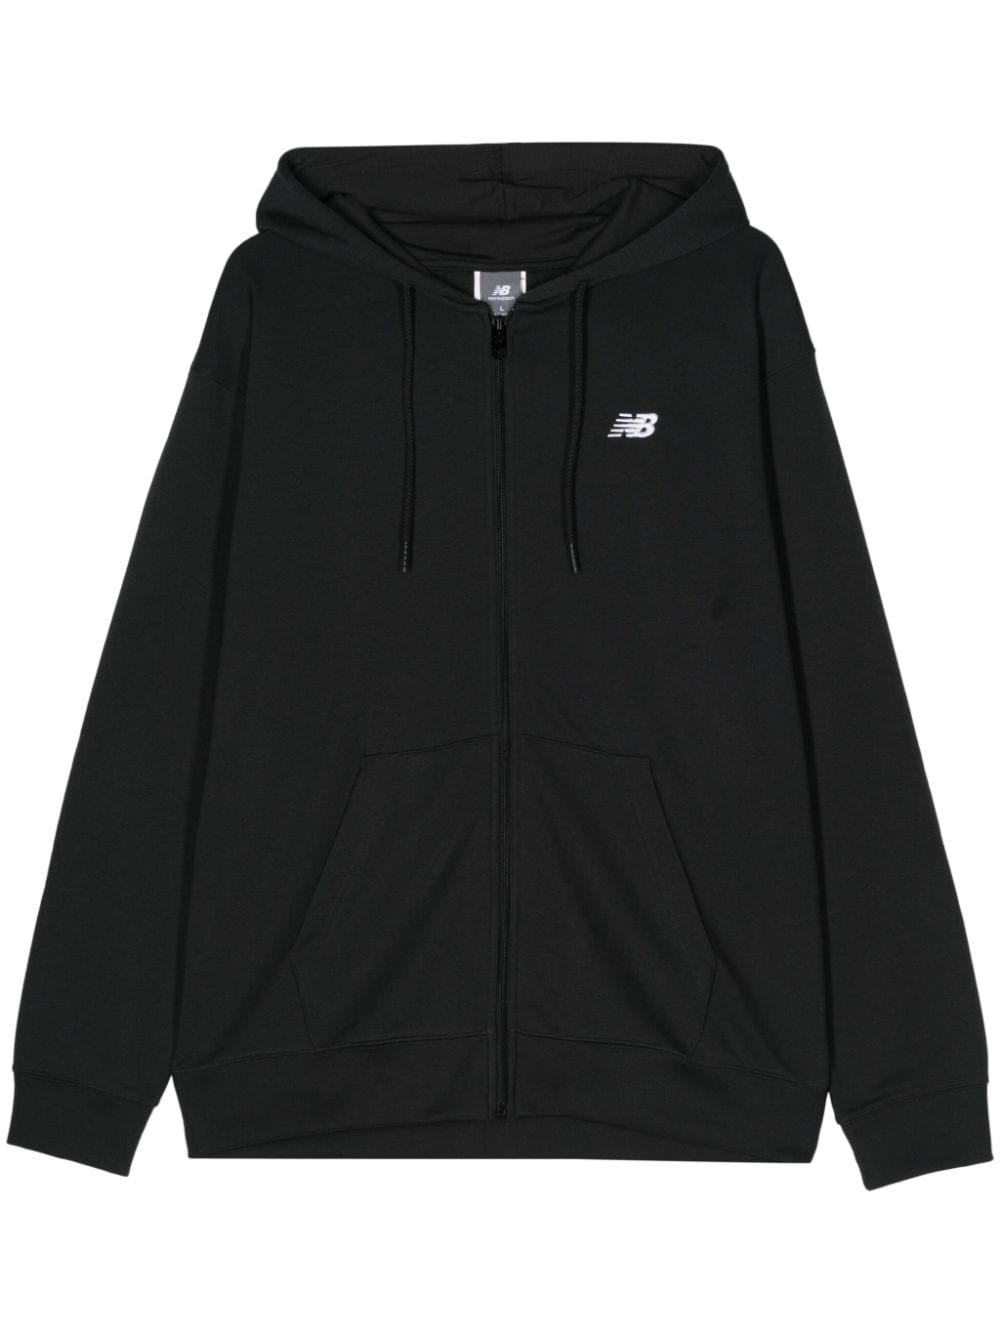 embroidered-logo zipped hoodie